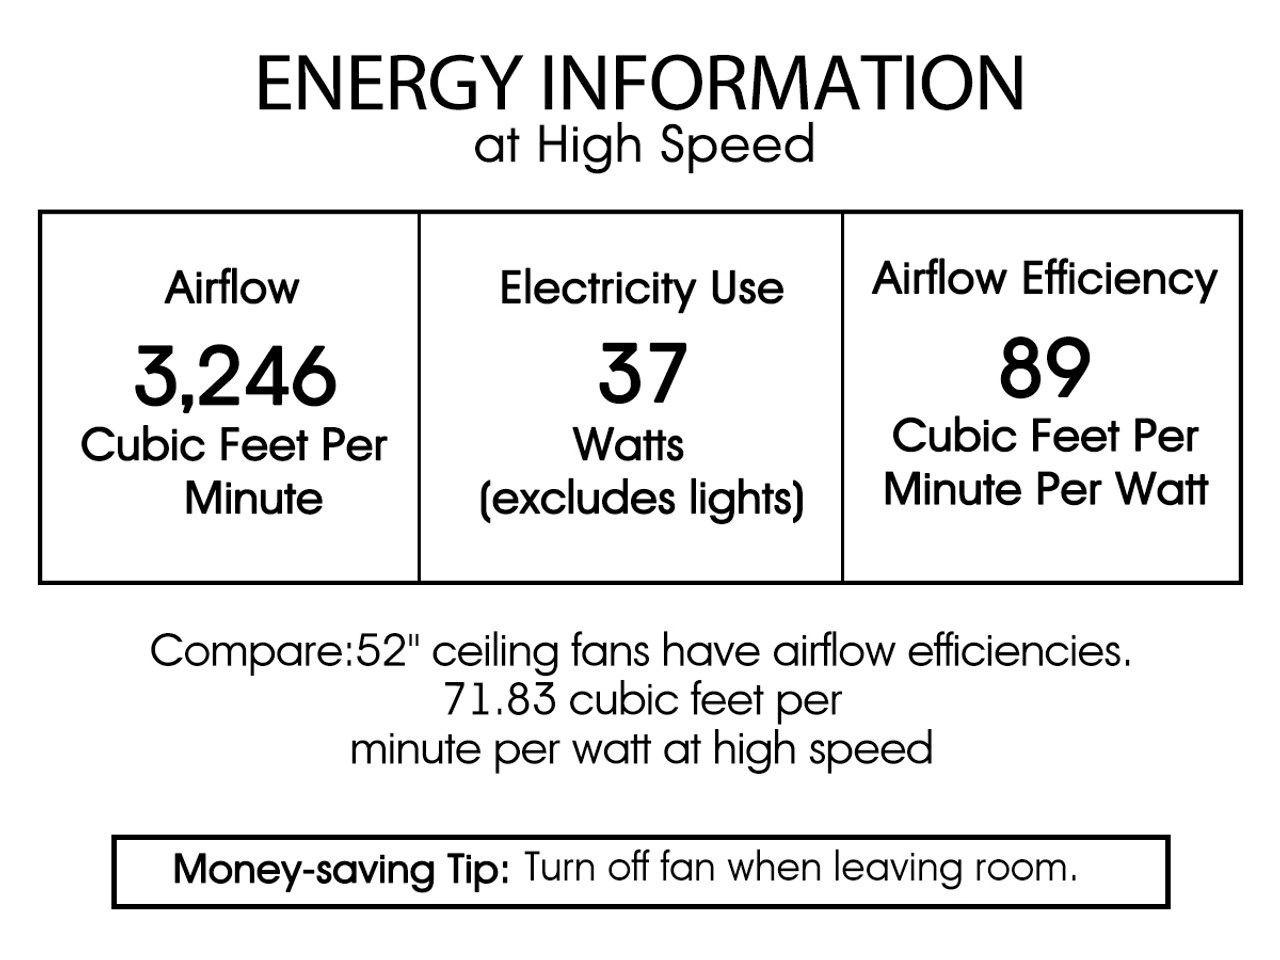 WAREHOUSE OF TIFFANY'S CFL-8343REMO Figuera 52 in. 1-Light Indoor Black Finish Remote Controlled Ceiling Fan with Light Kit